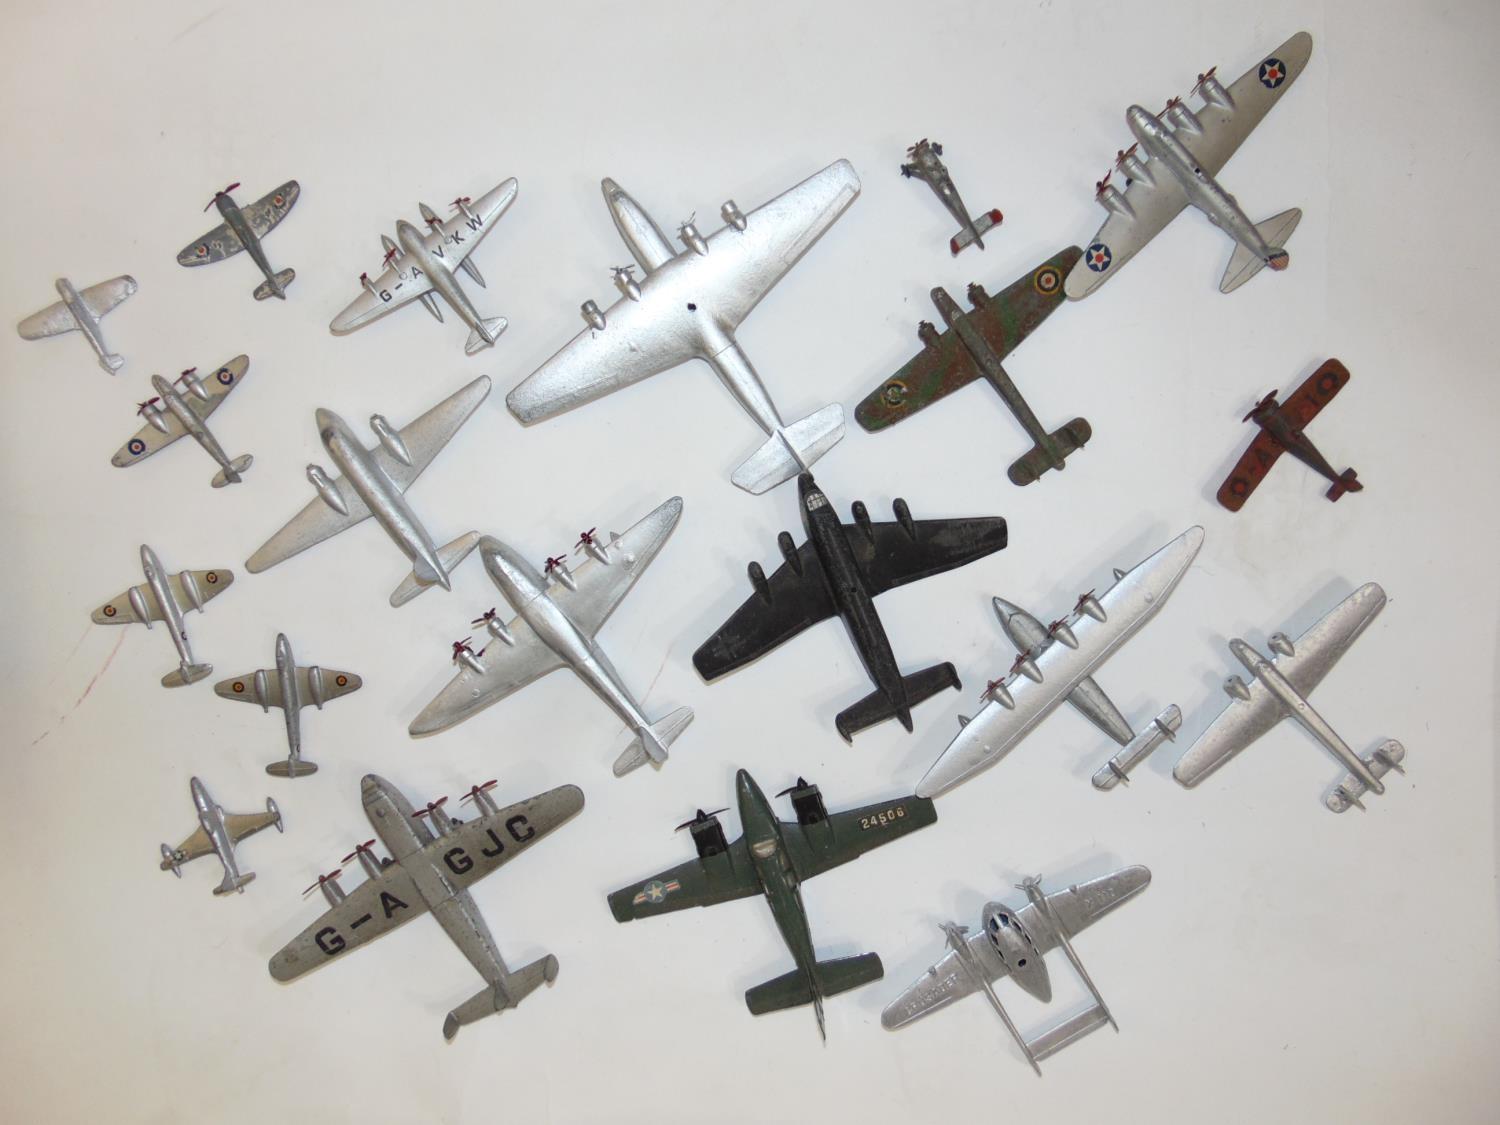 17 model Dinky toy aircraft including Heavy Bomber, Flying Boat, Beechcraft c55 Baron etc and 3